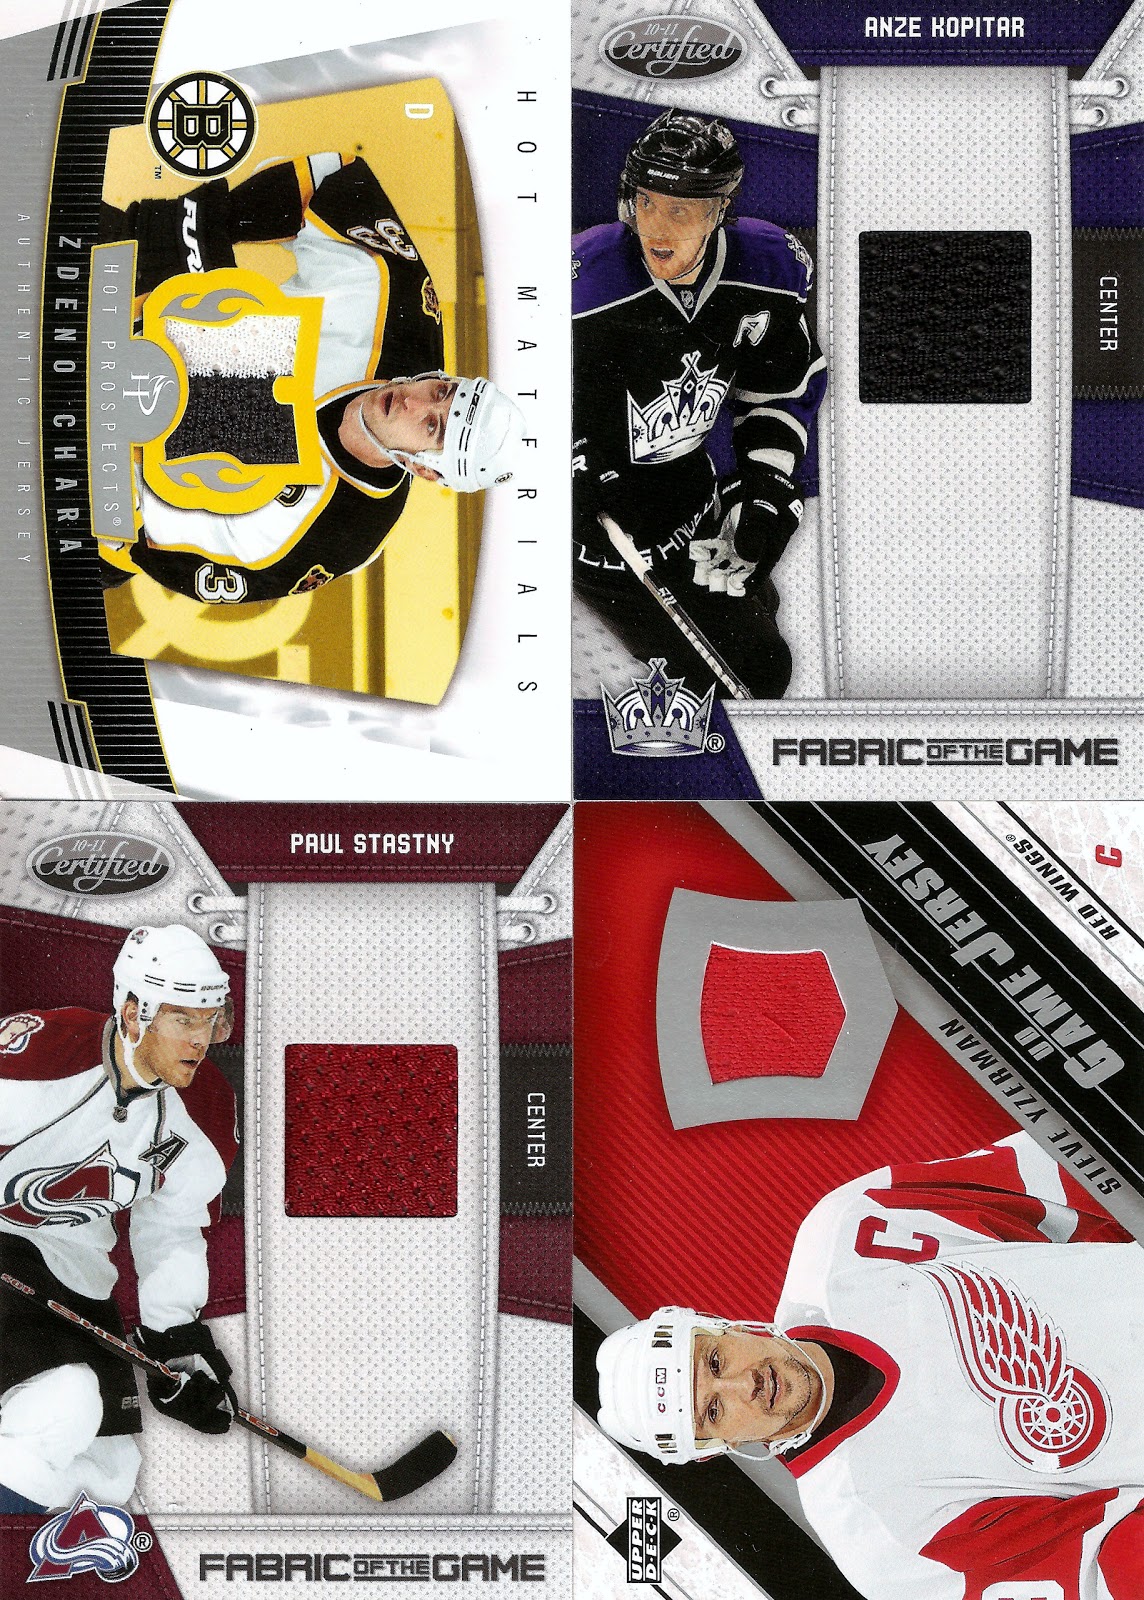 Card Boarded Hockey Cards Make Great Christmas Gifts